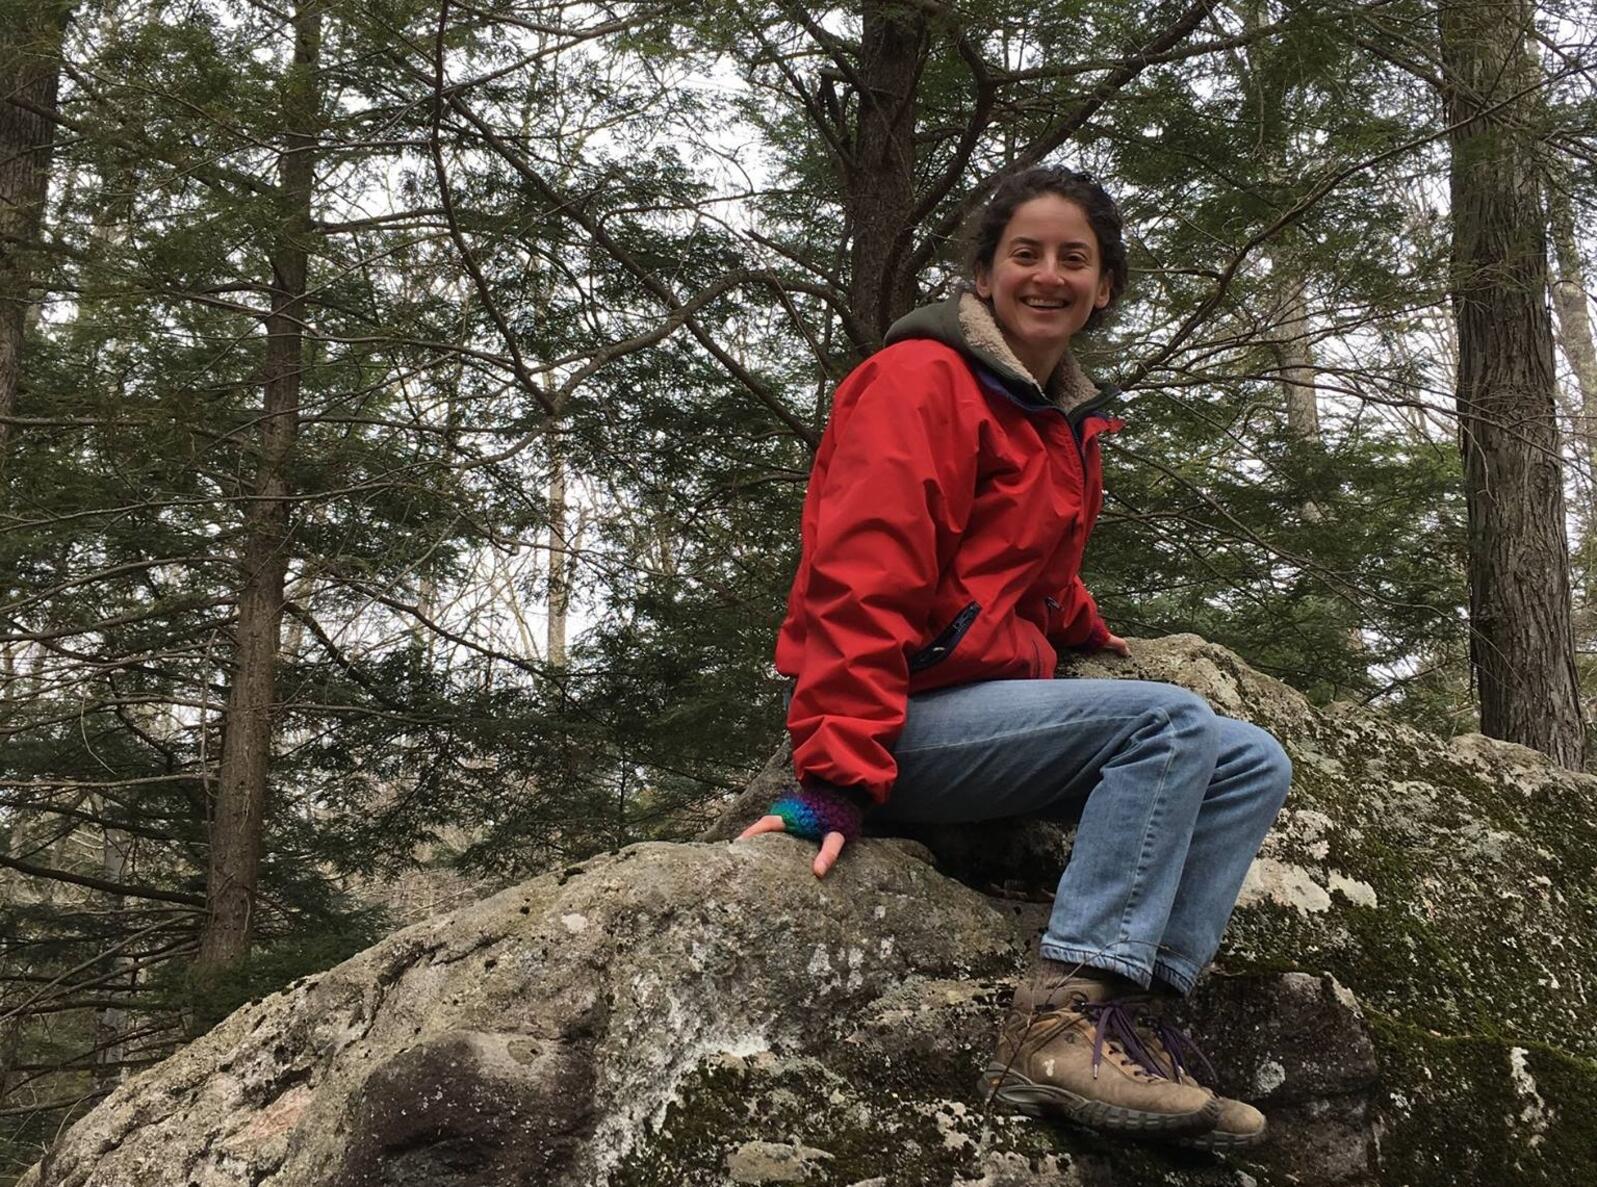 Rosa sitting on a rock in the forest.